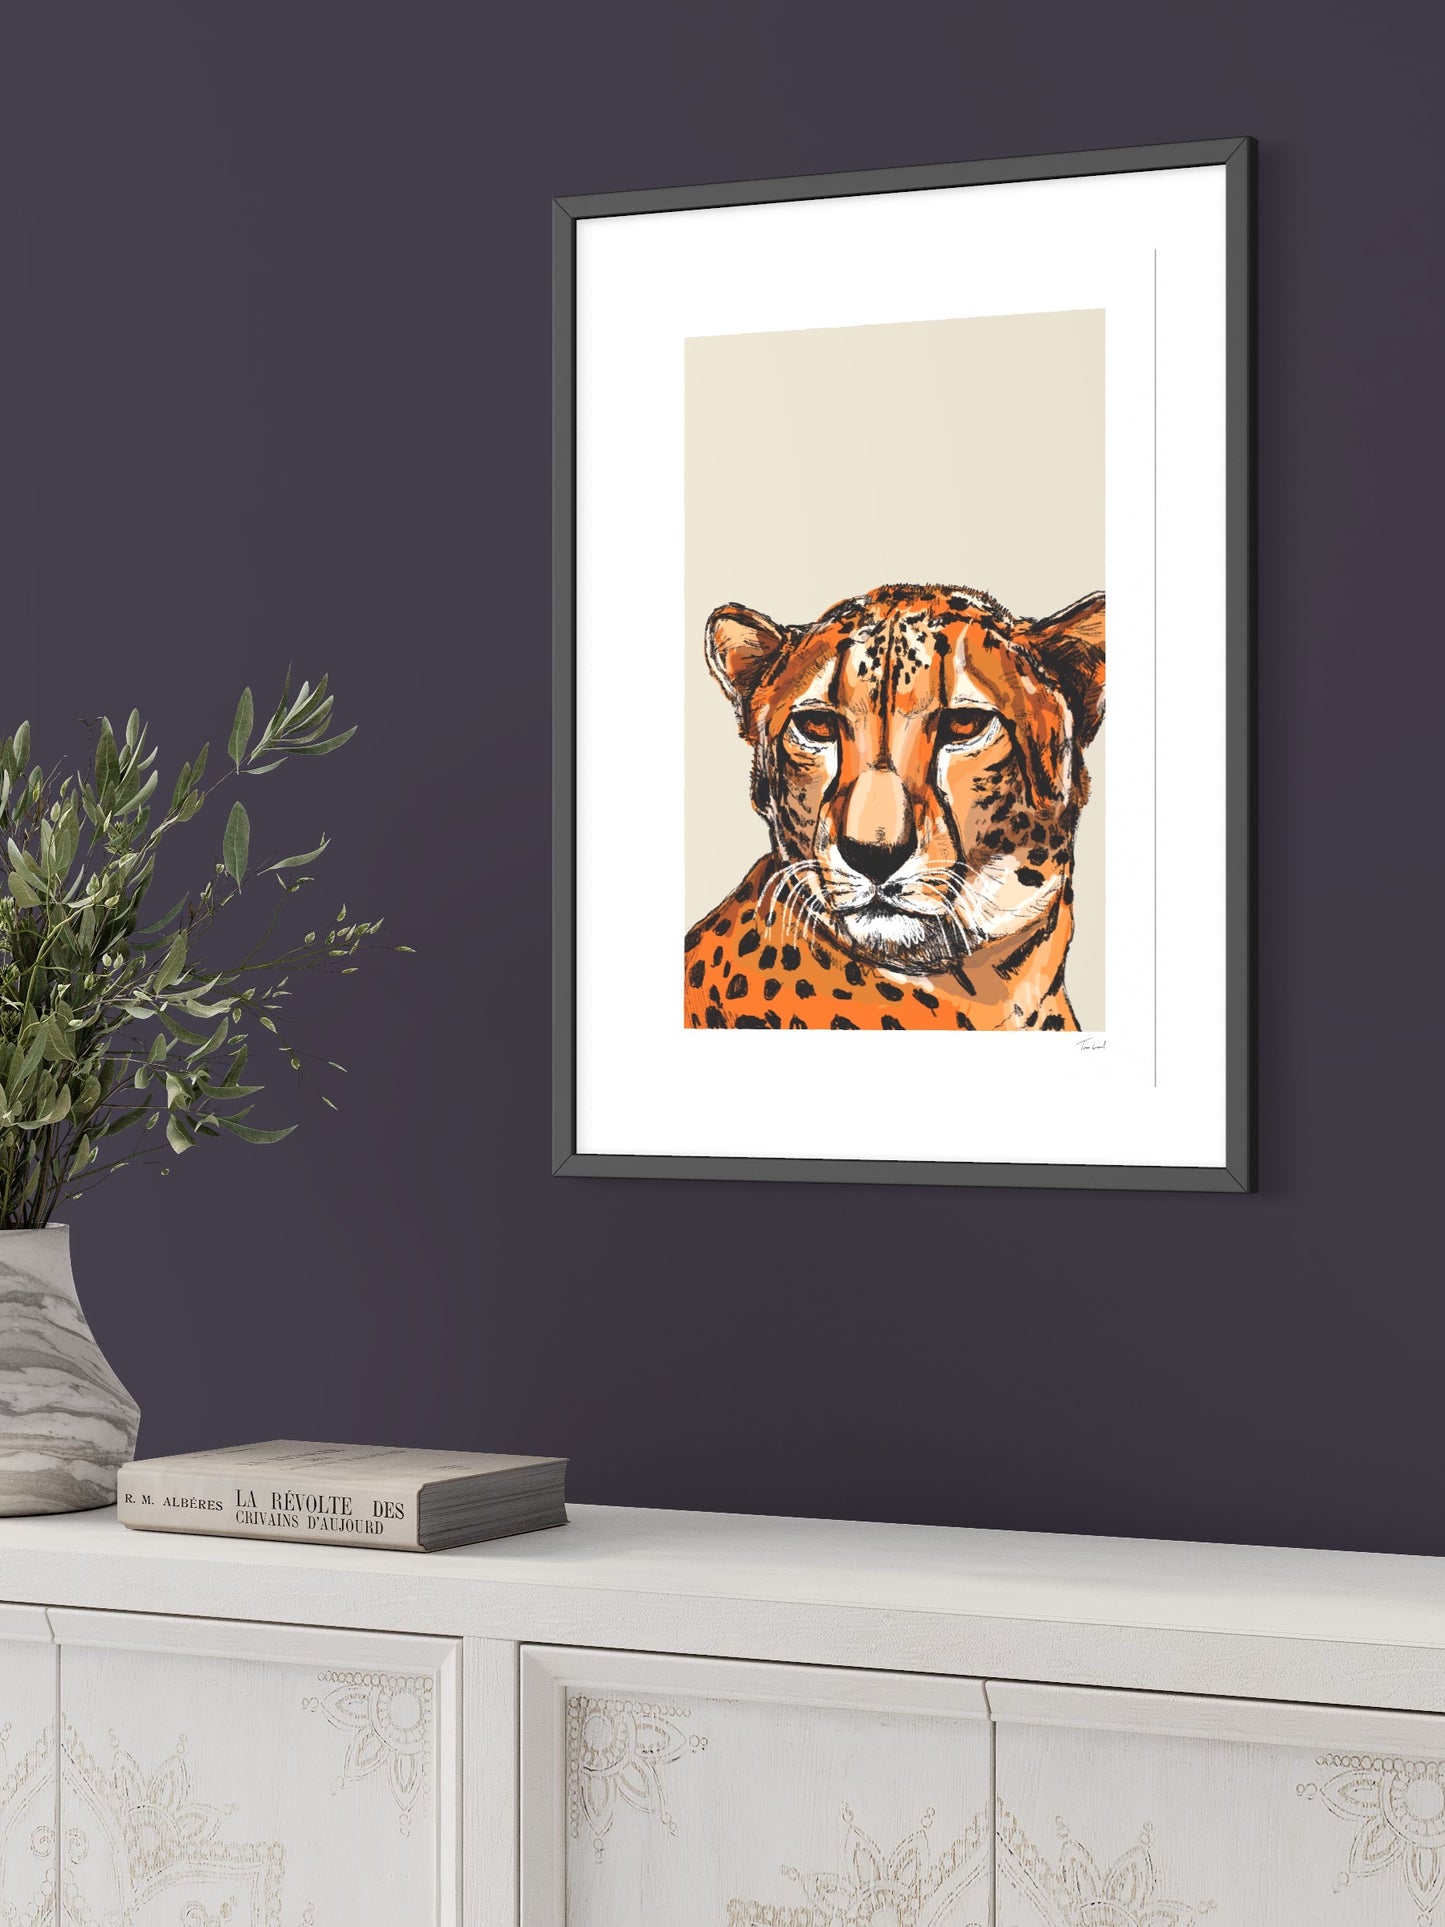 This image shows a giclee wall art print by Tom Laird Illustration of a Cheetah, framed in a beautiful living room with tasteful modern home decor. This art print is available from Tom Laird Illustration in various sizes.